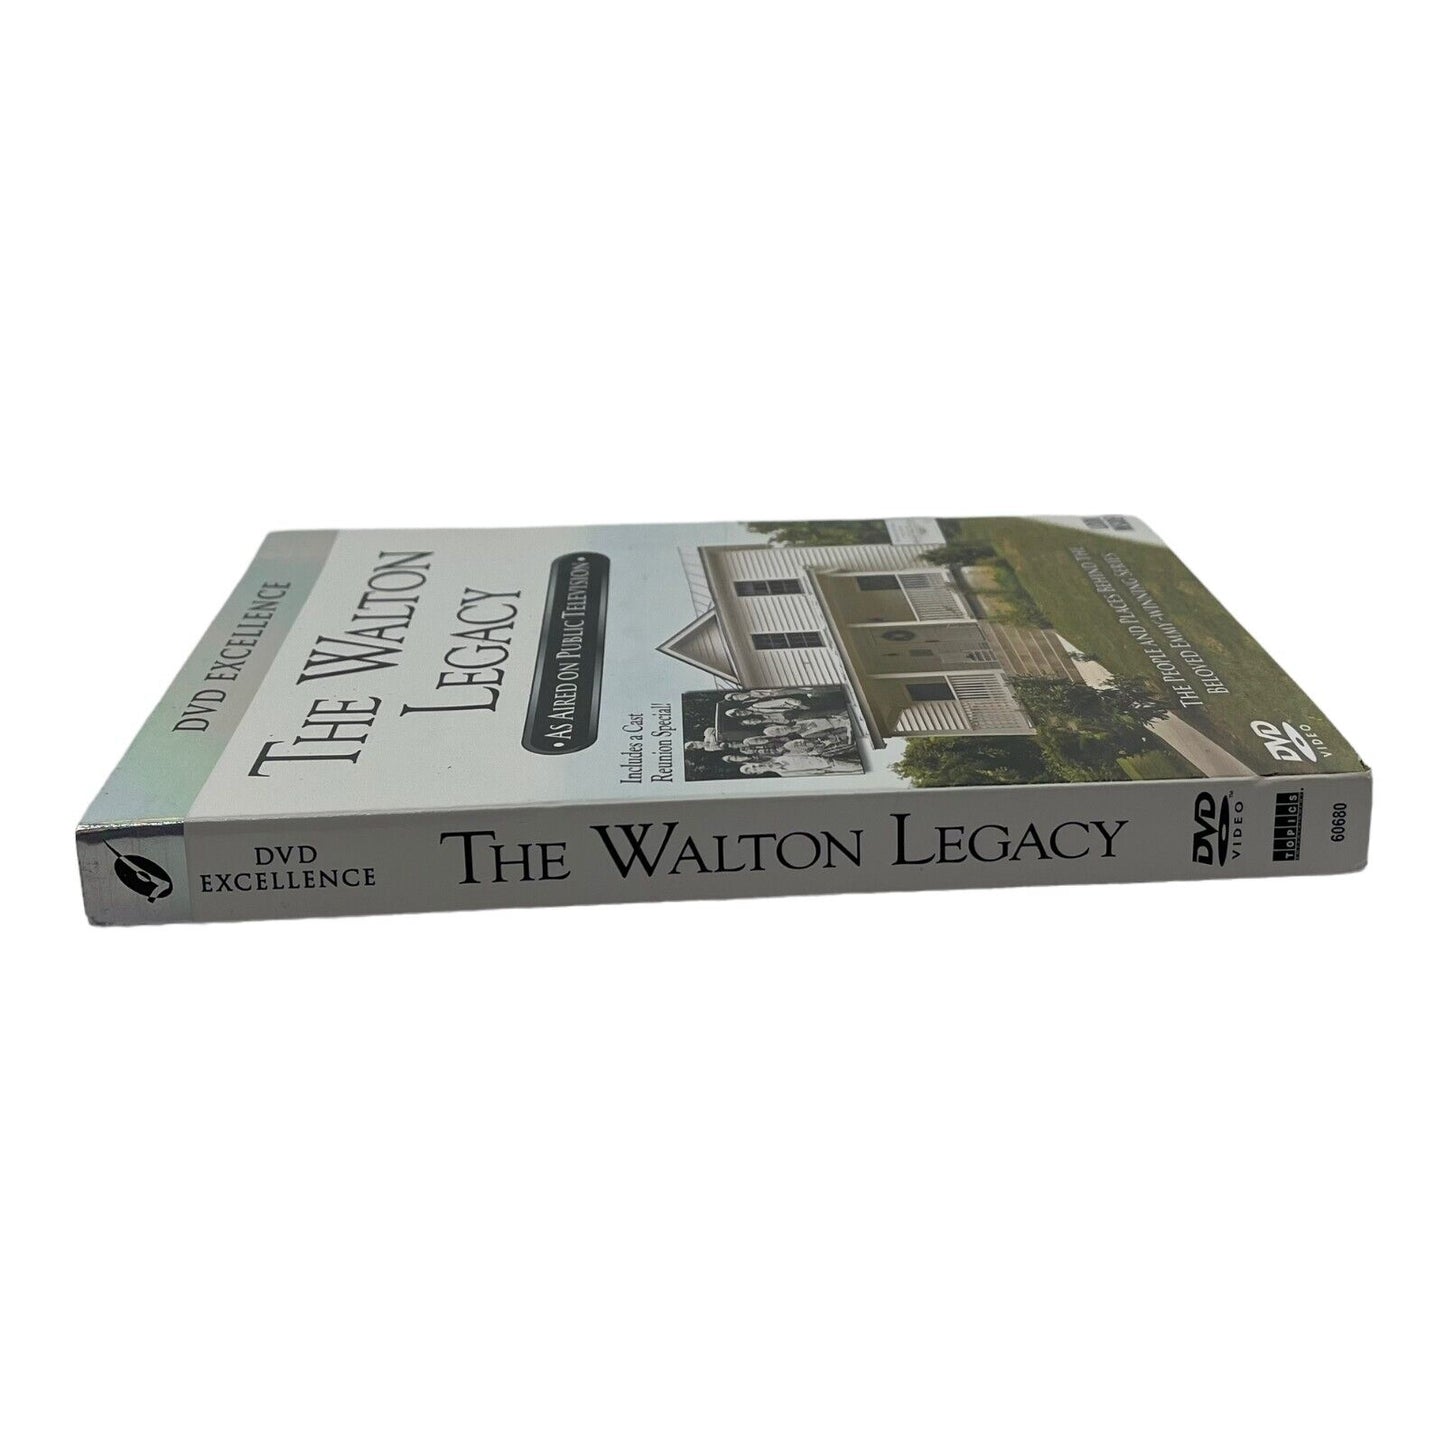 The Walton Legacy DVD As Seen on Public Television with Slipcover